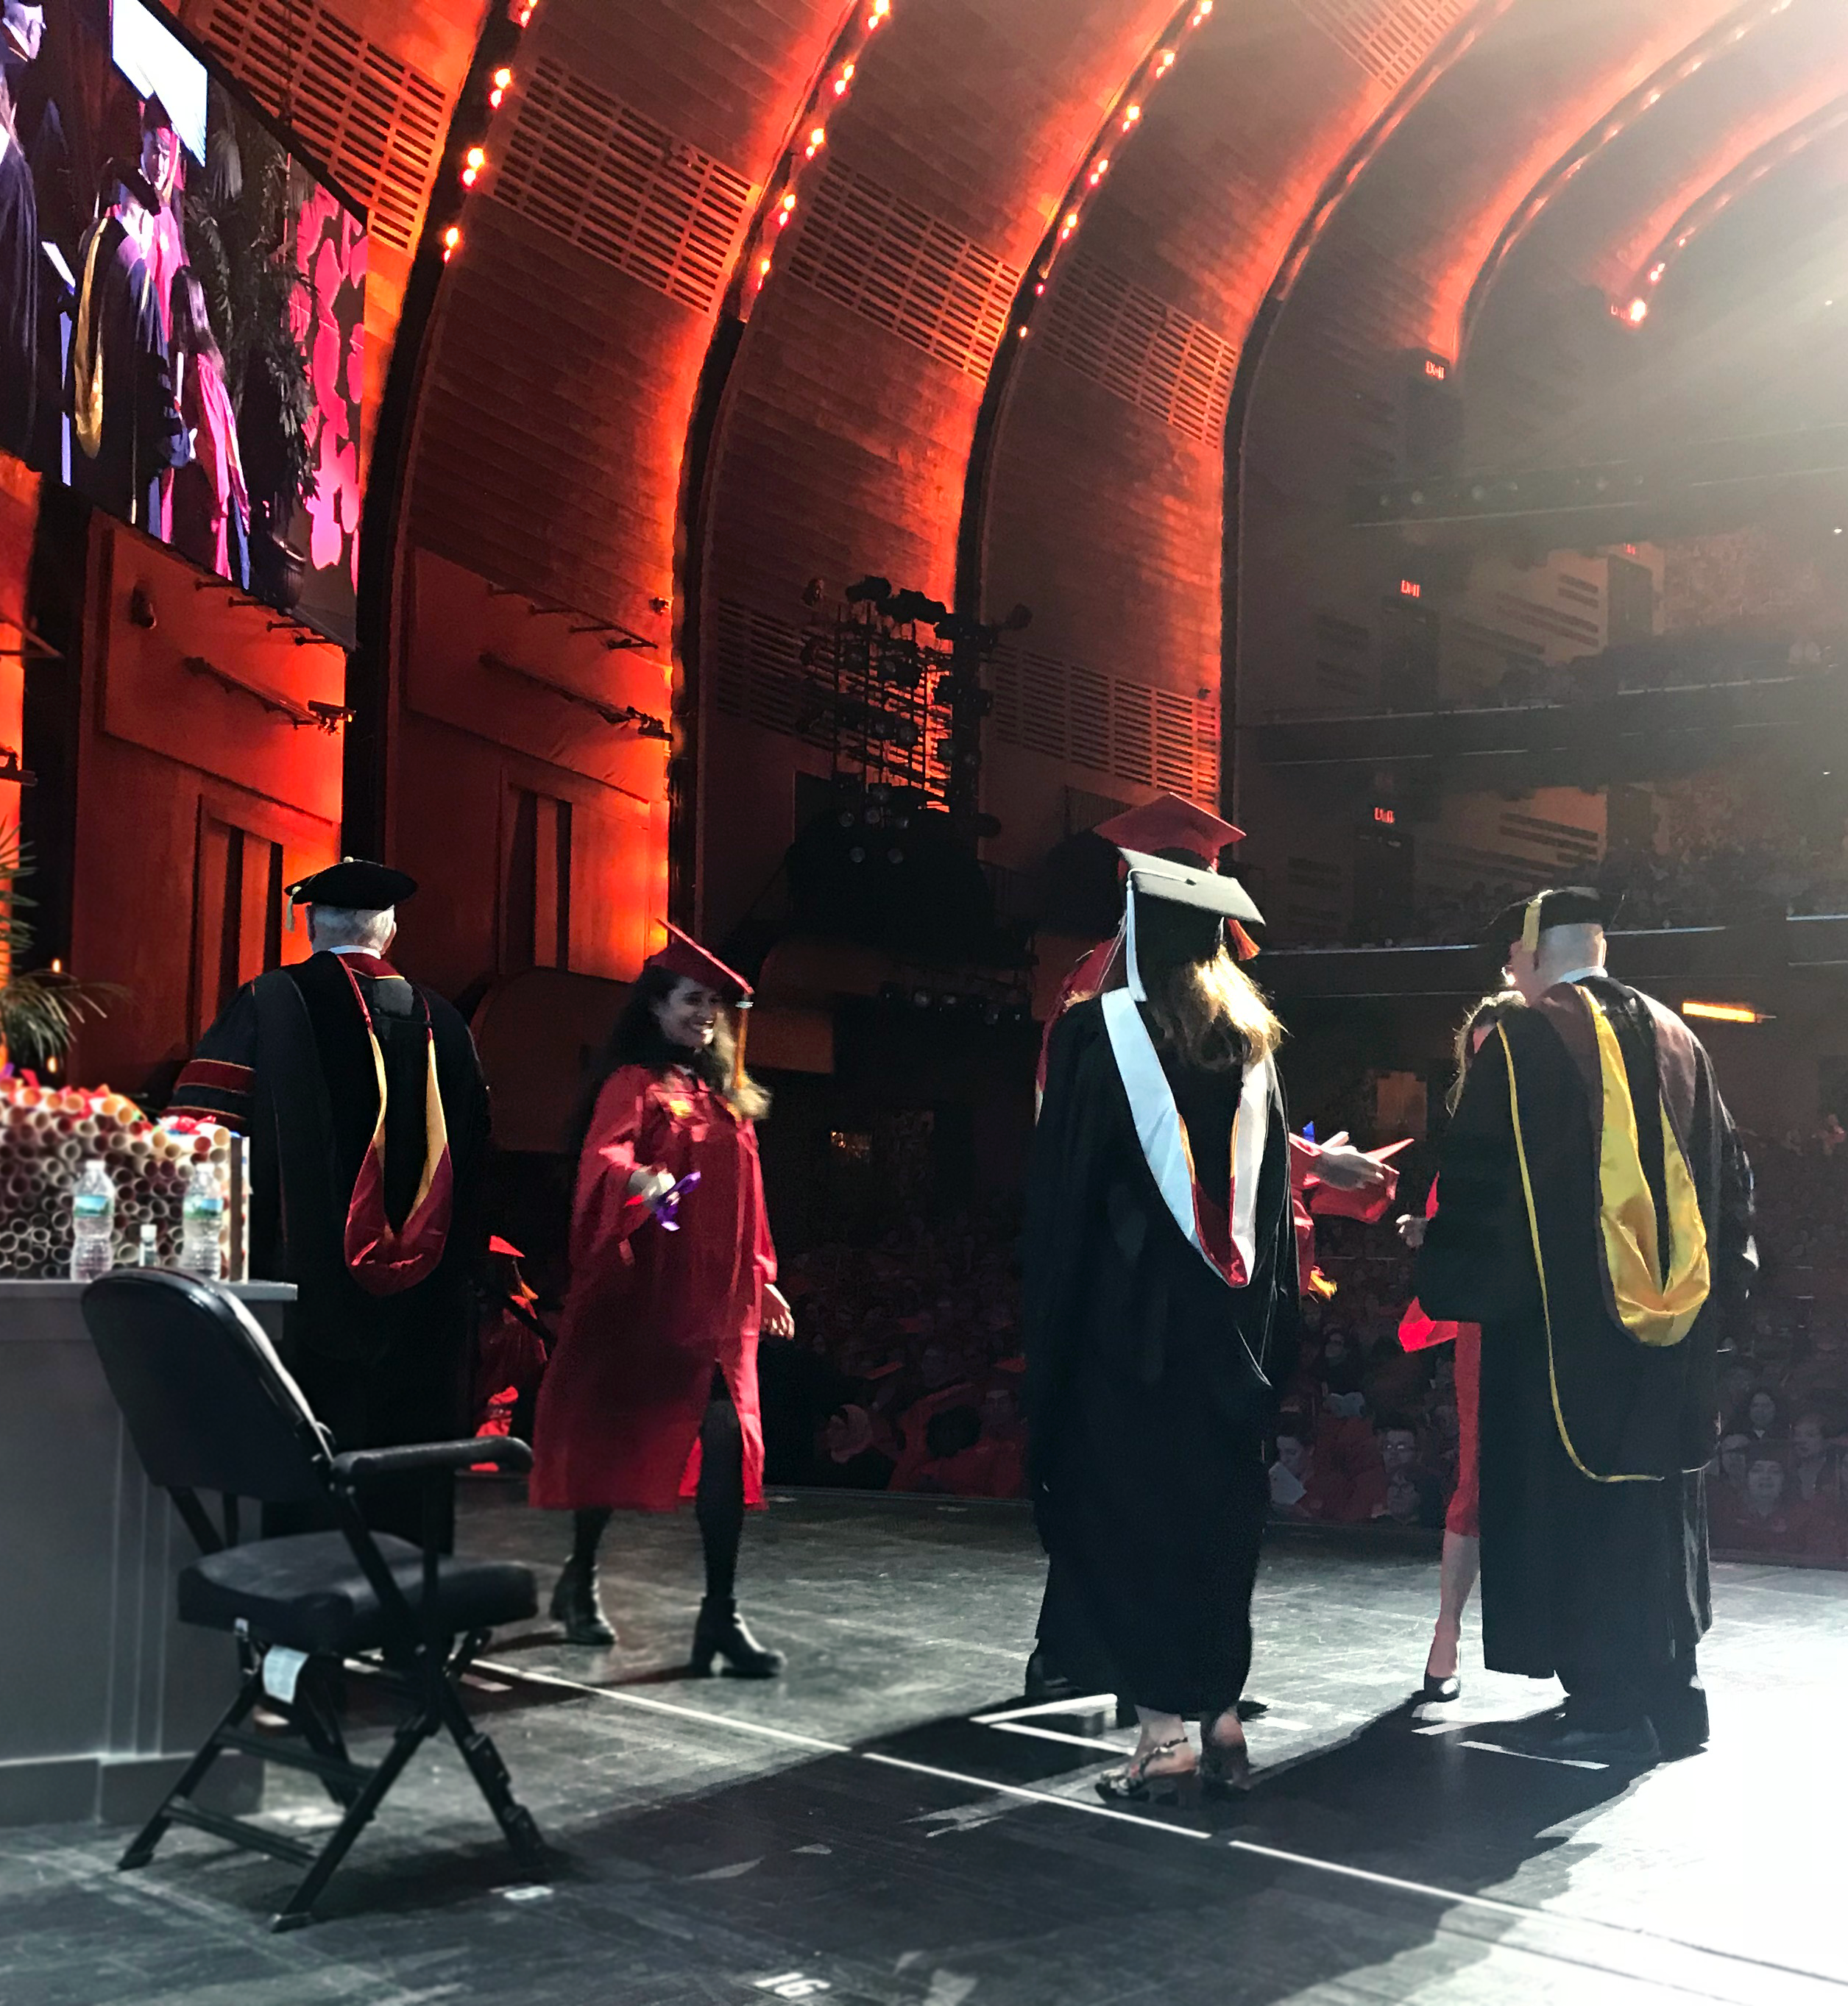 A photo of a group of students and teacher on a stage at the graduation ceremony. They are wearing black or red robes and hats.